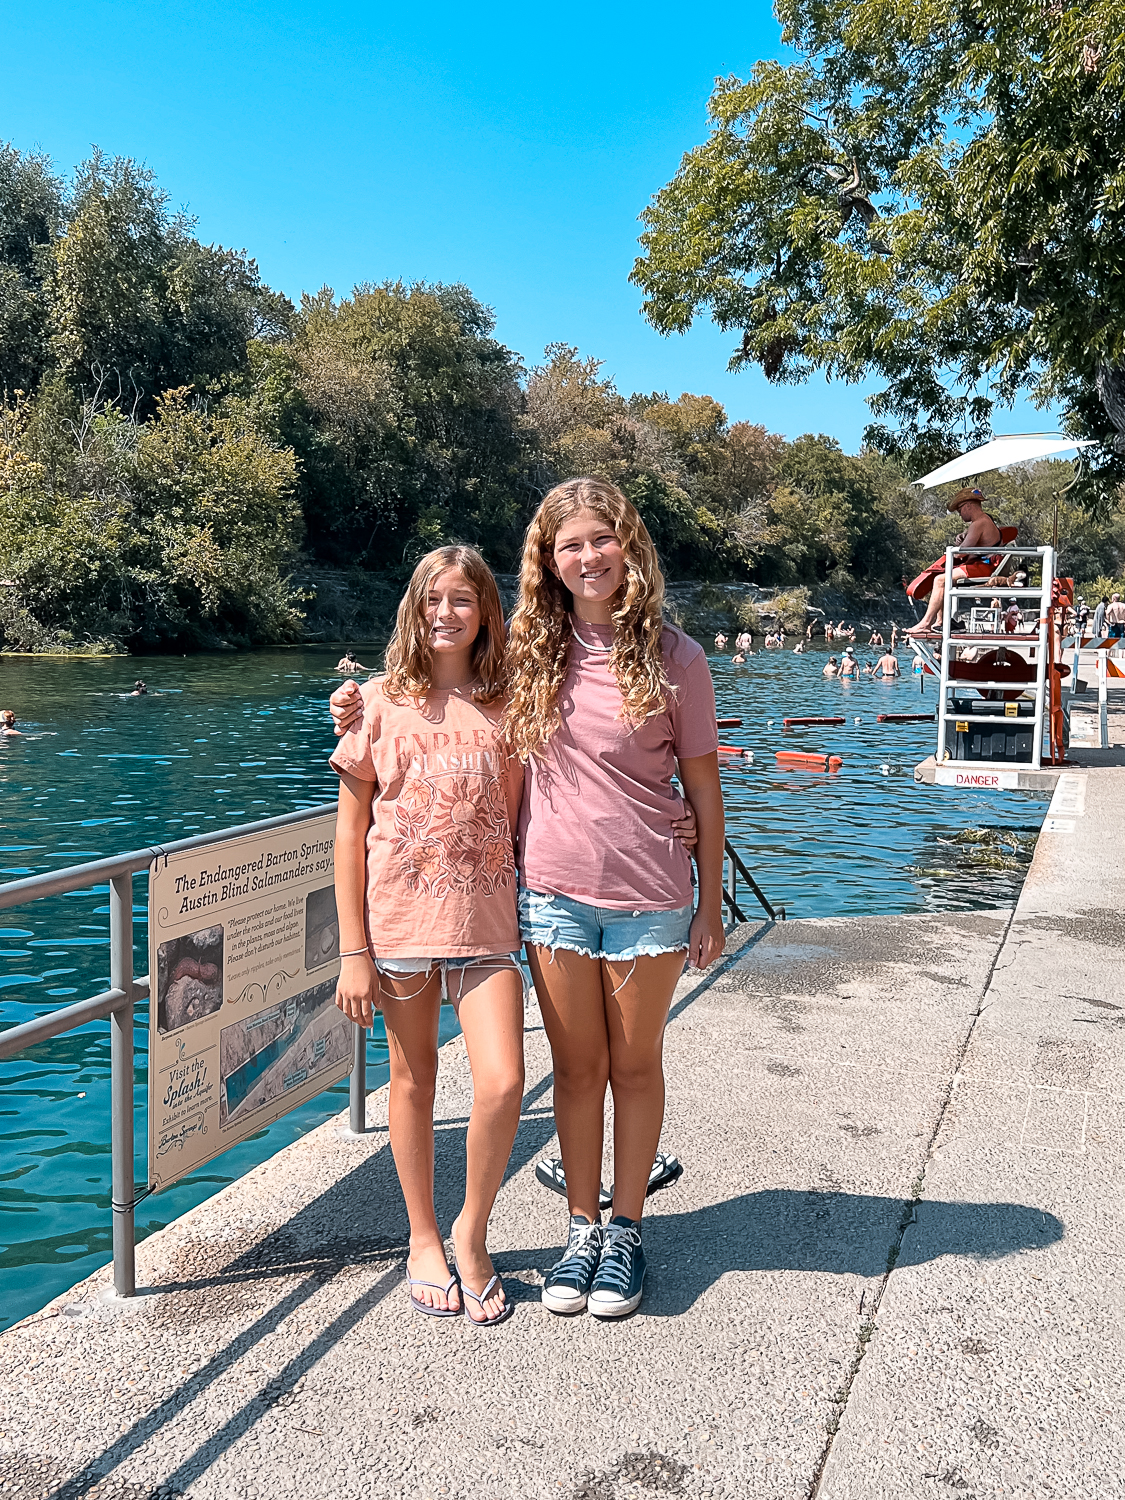 Pacific Globetrotters, budget family travel blog, shares Best Spots In Austin With Kids